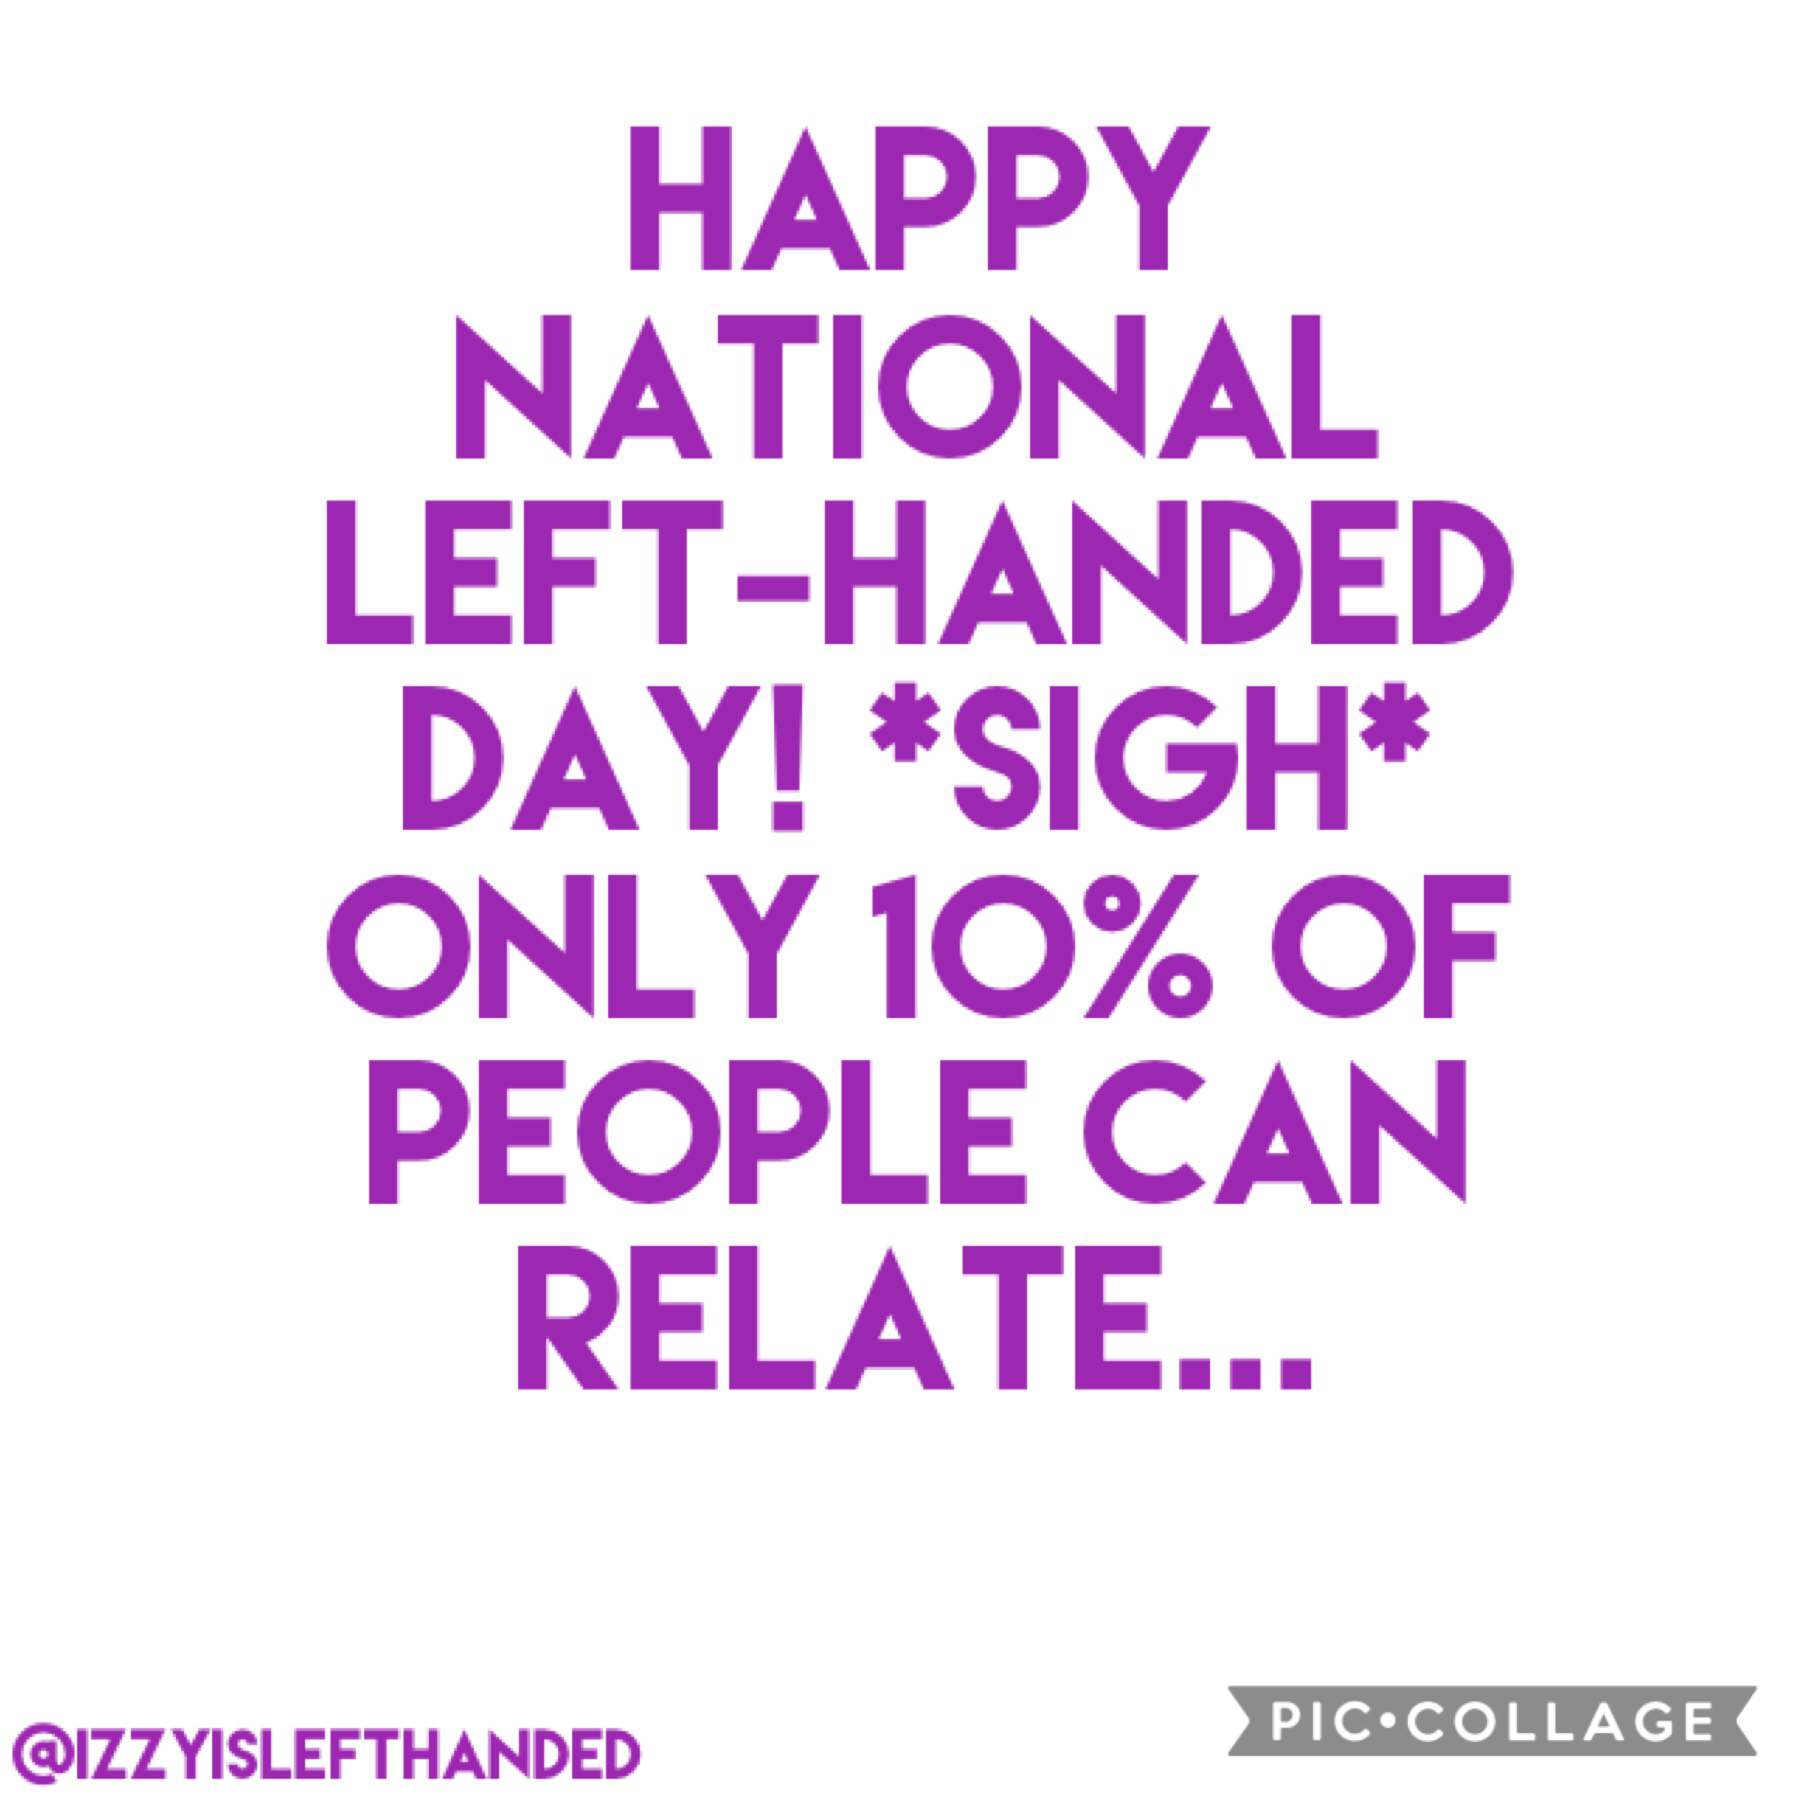 TAP THE HAND 🖐🏼

YAY NATIONAL LEFT HANDED DAY!!!!!!!!!!!!!!

I’m left handed if you did not know already 
Q: are you lefty or righty or ambidextrous??!

K BYE POTATOES 🥔 